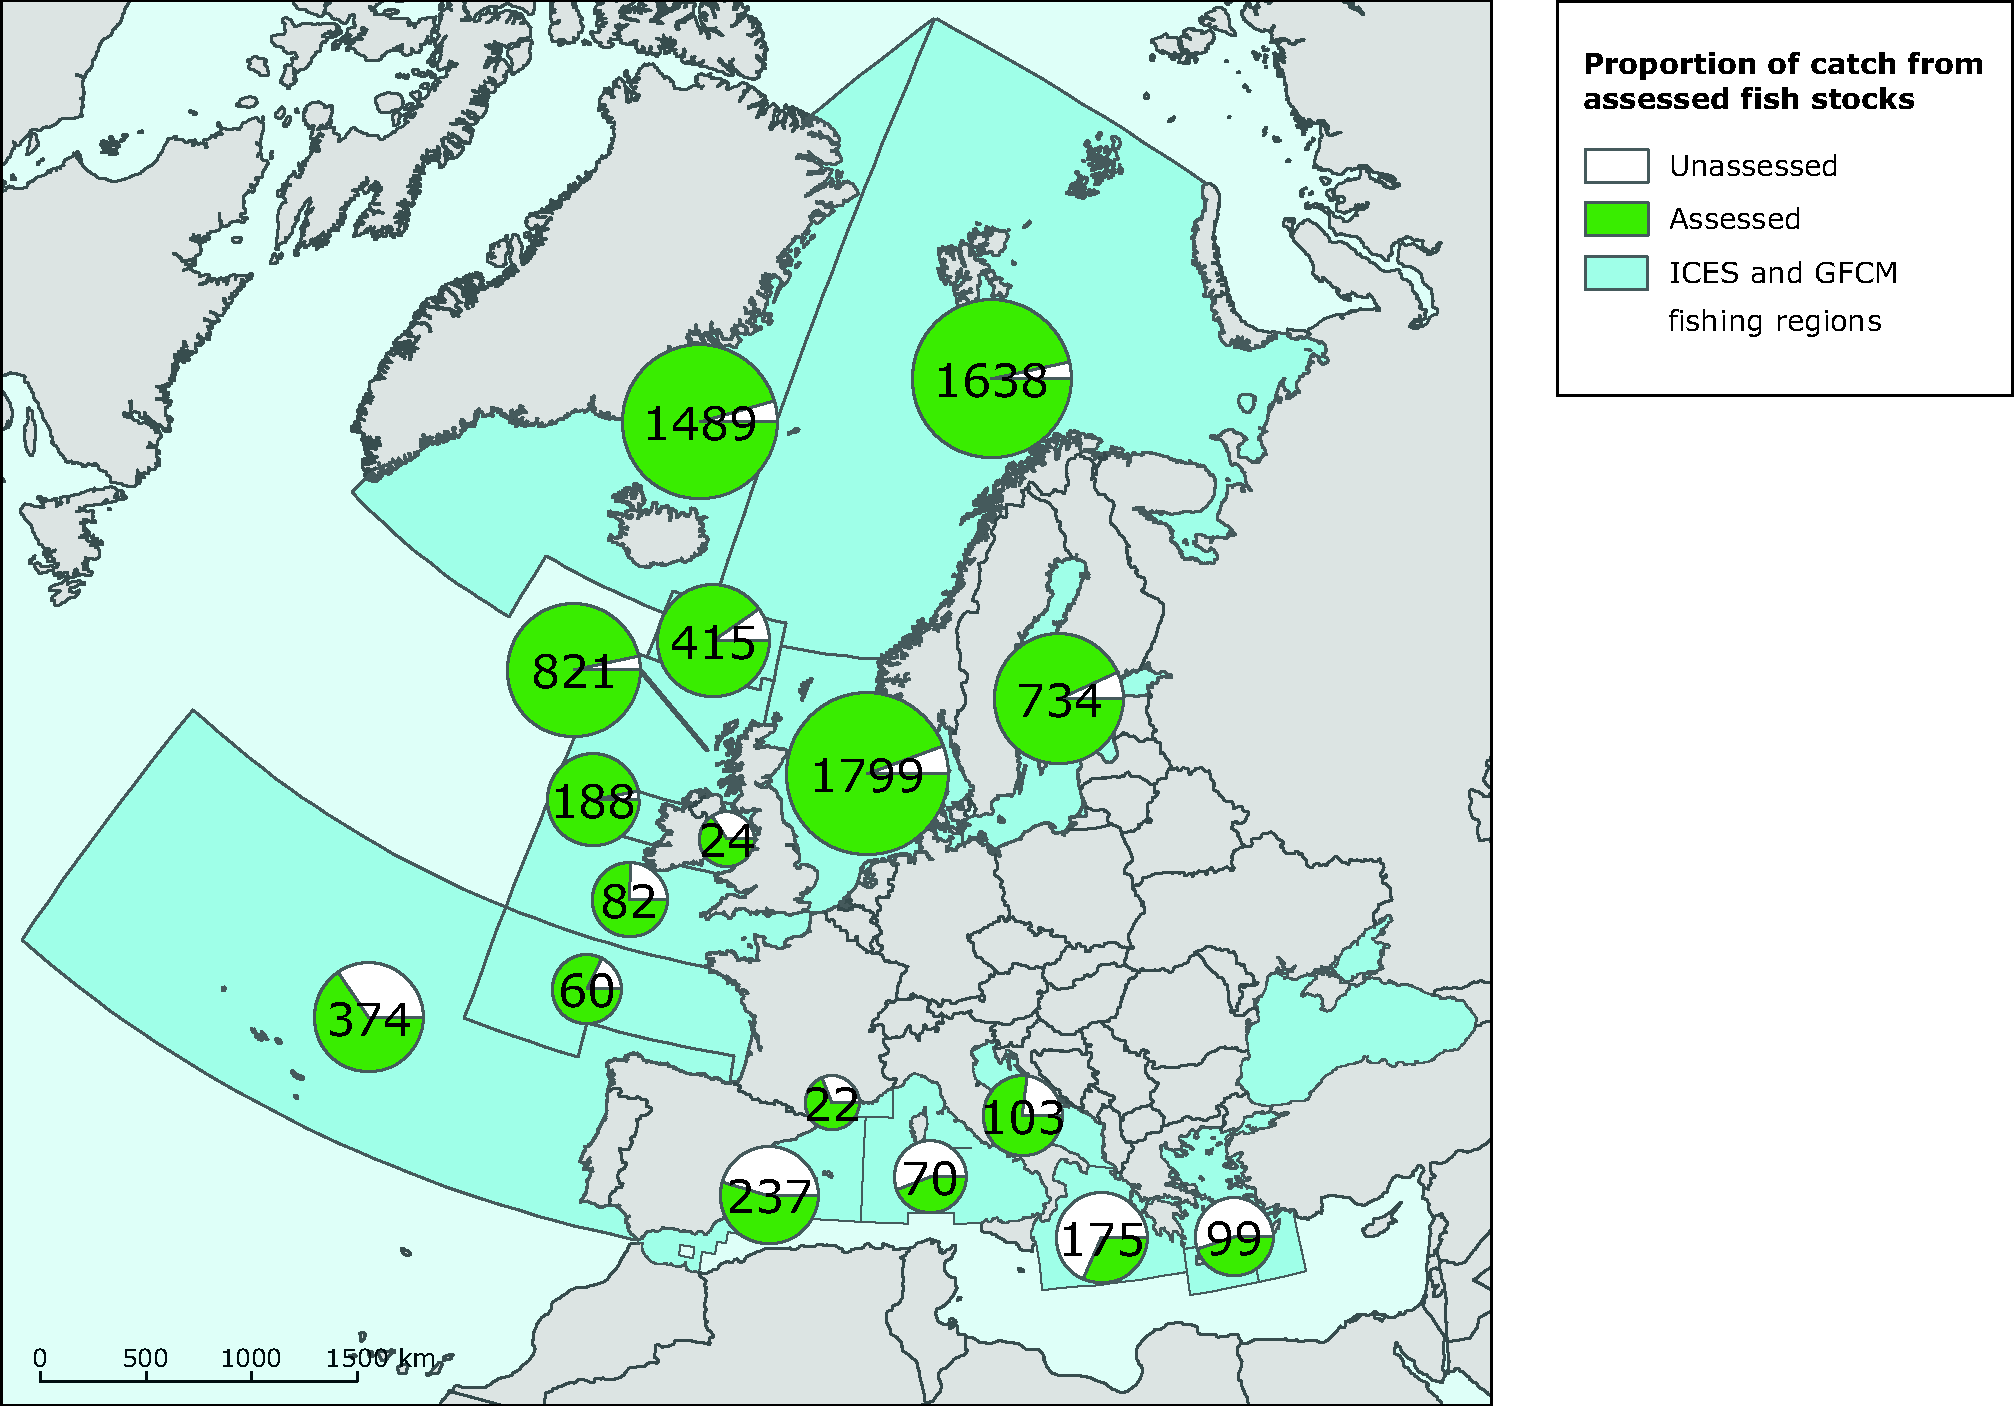 Total catch in ICES and GFCM fishing regions of Europe in 2006